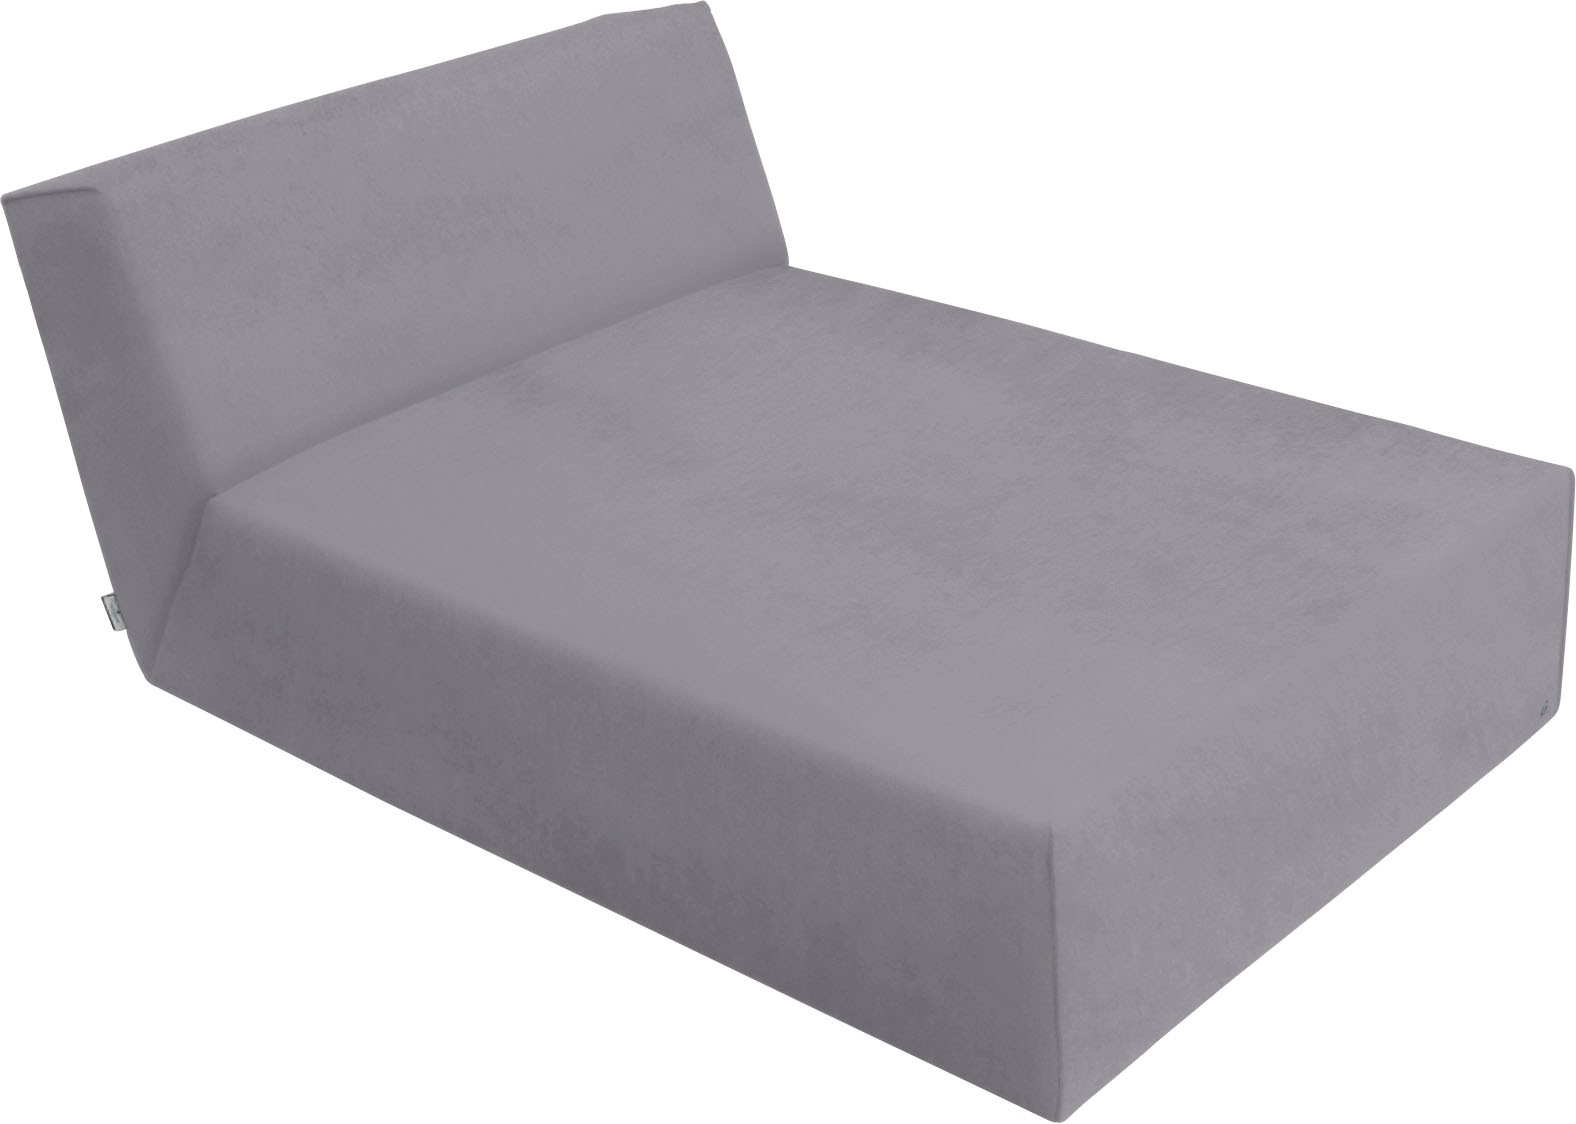 TOM TAILOR HOME Chaiselongue "ELEMENTS", Sofaelement wahlweise mit Bettfunktion